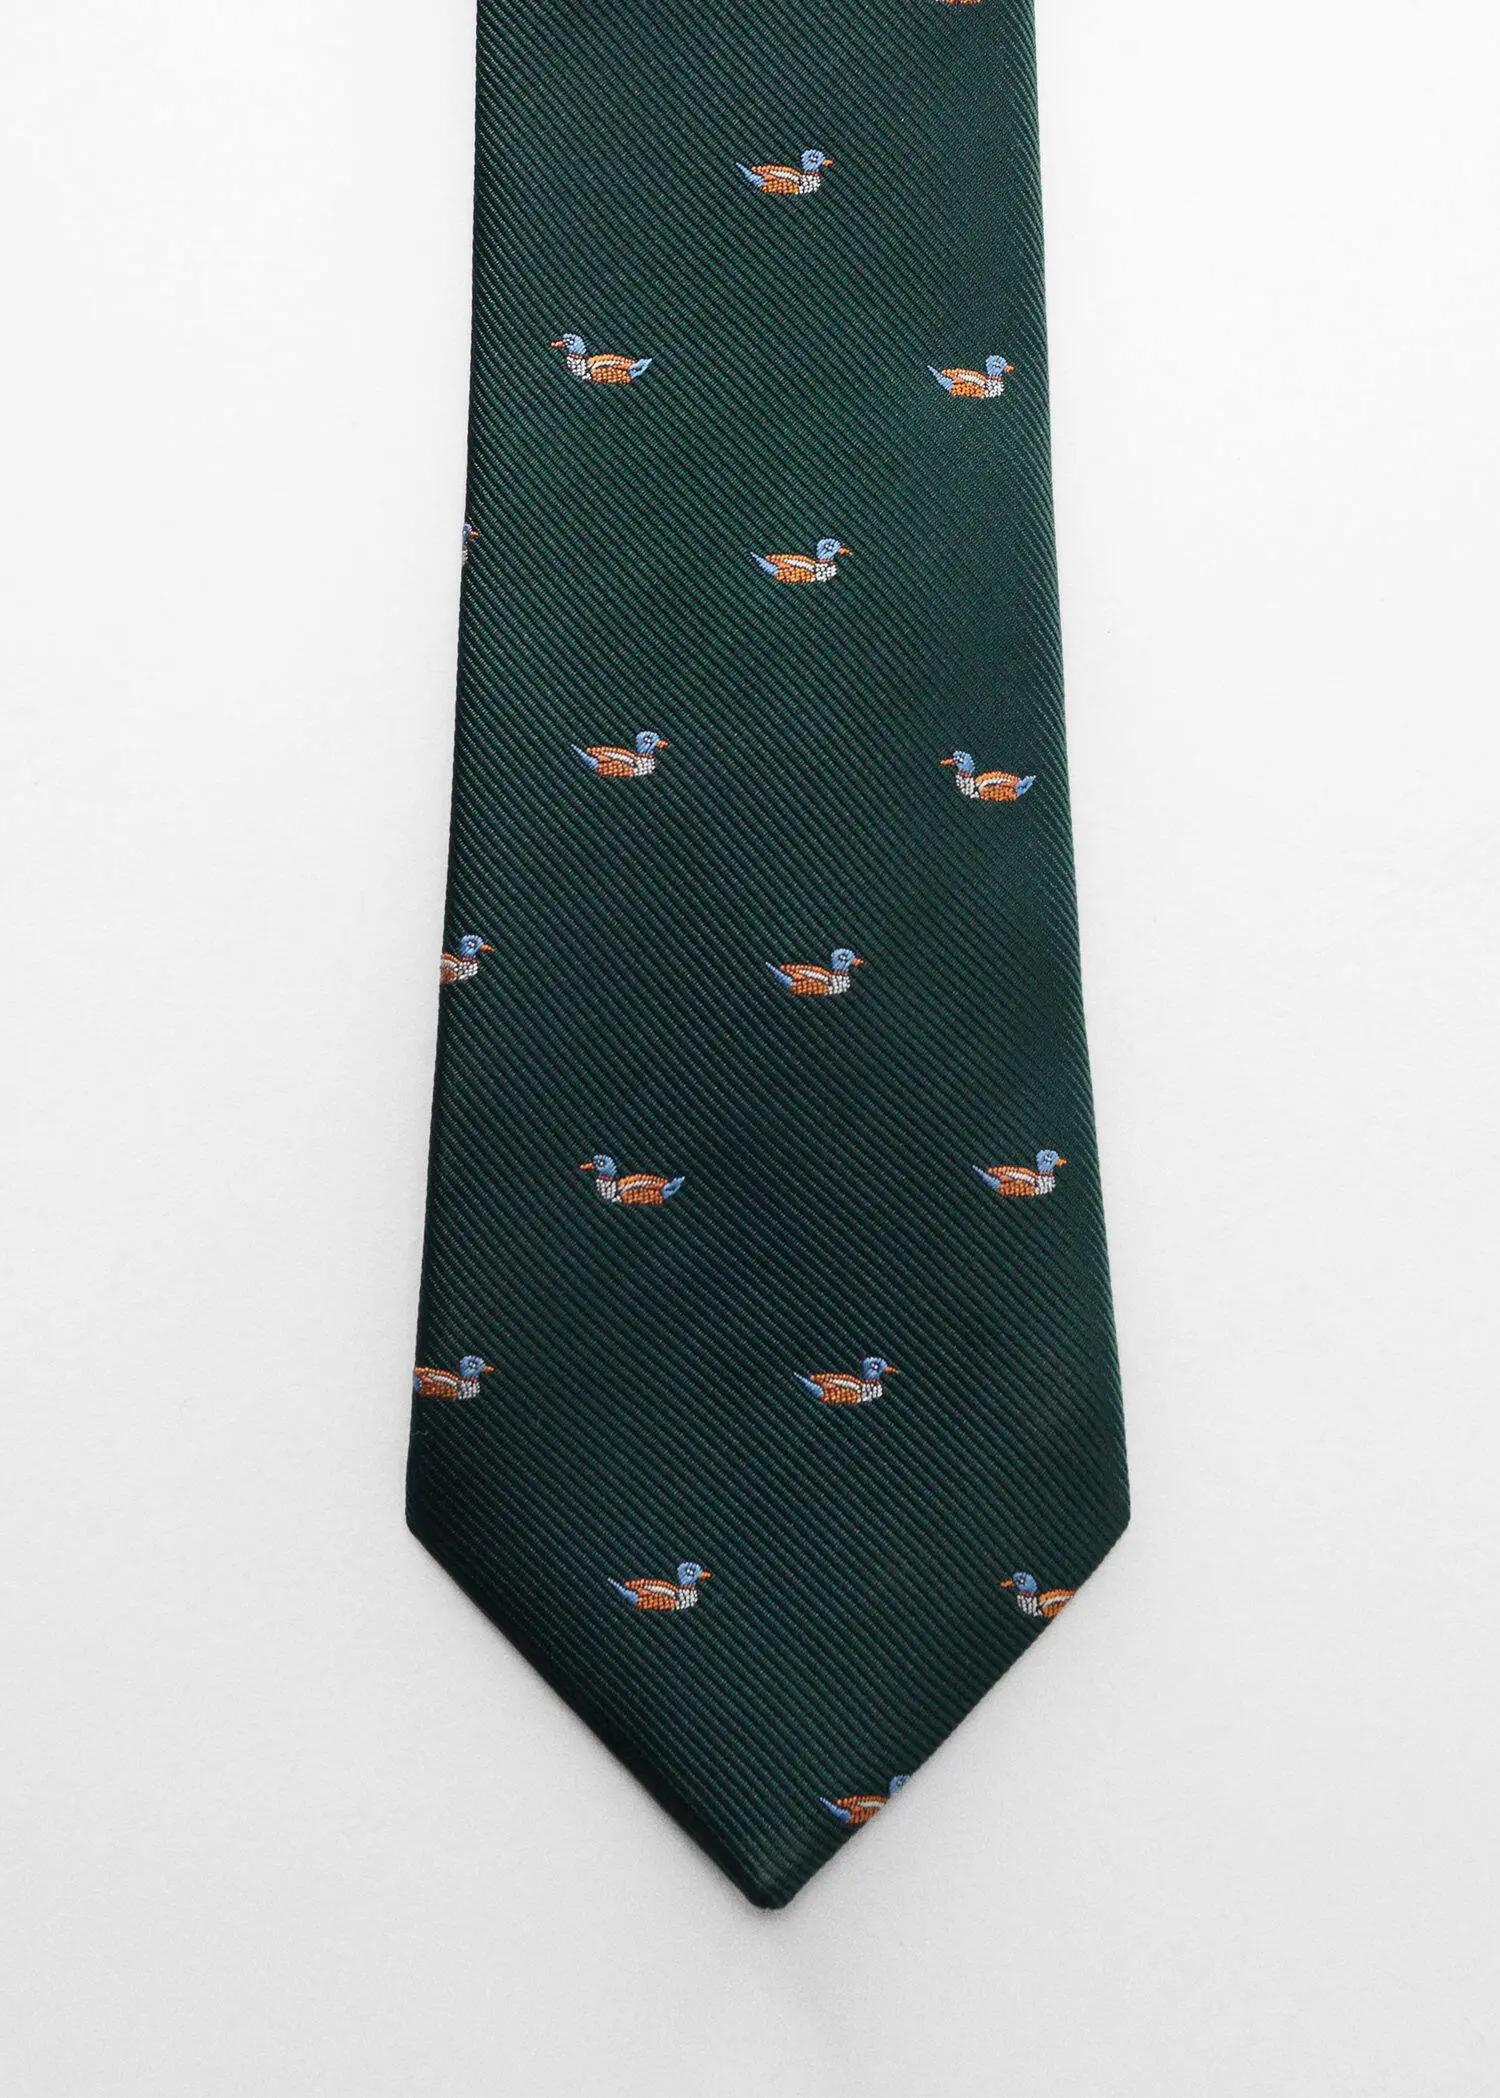 Mango Floral print tie. a green neck tie with ducks on it. 